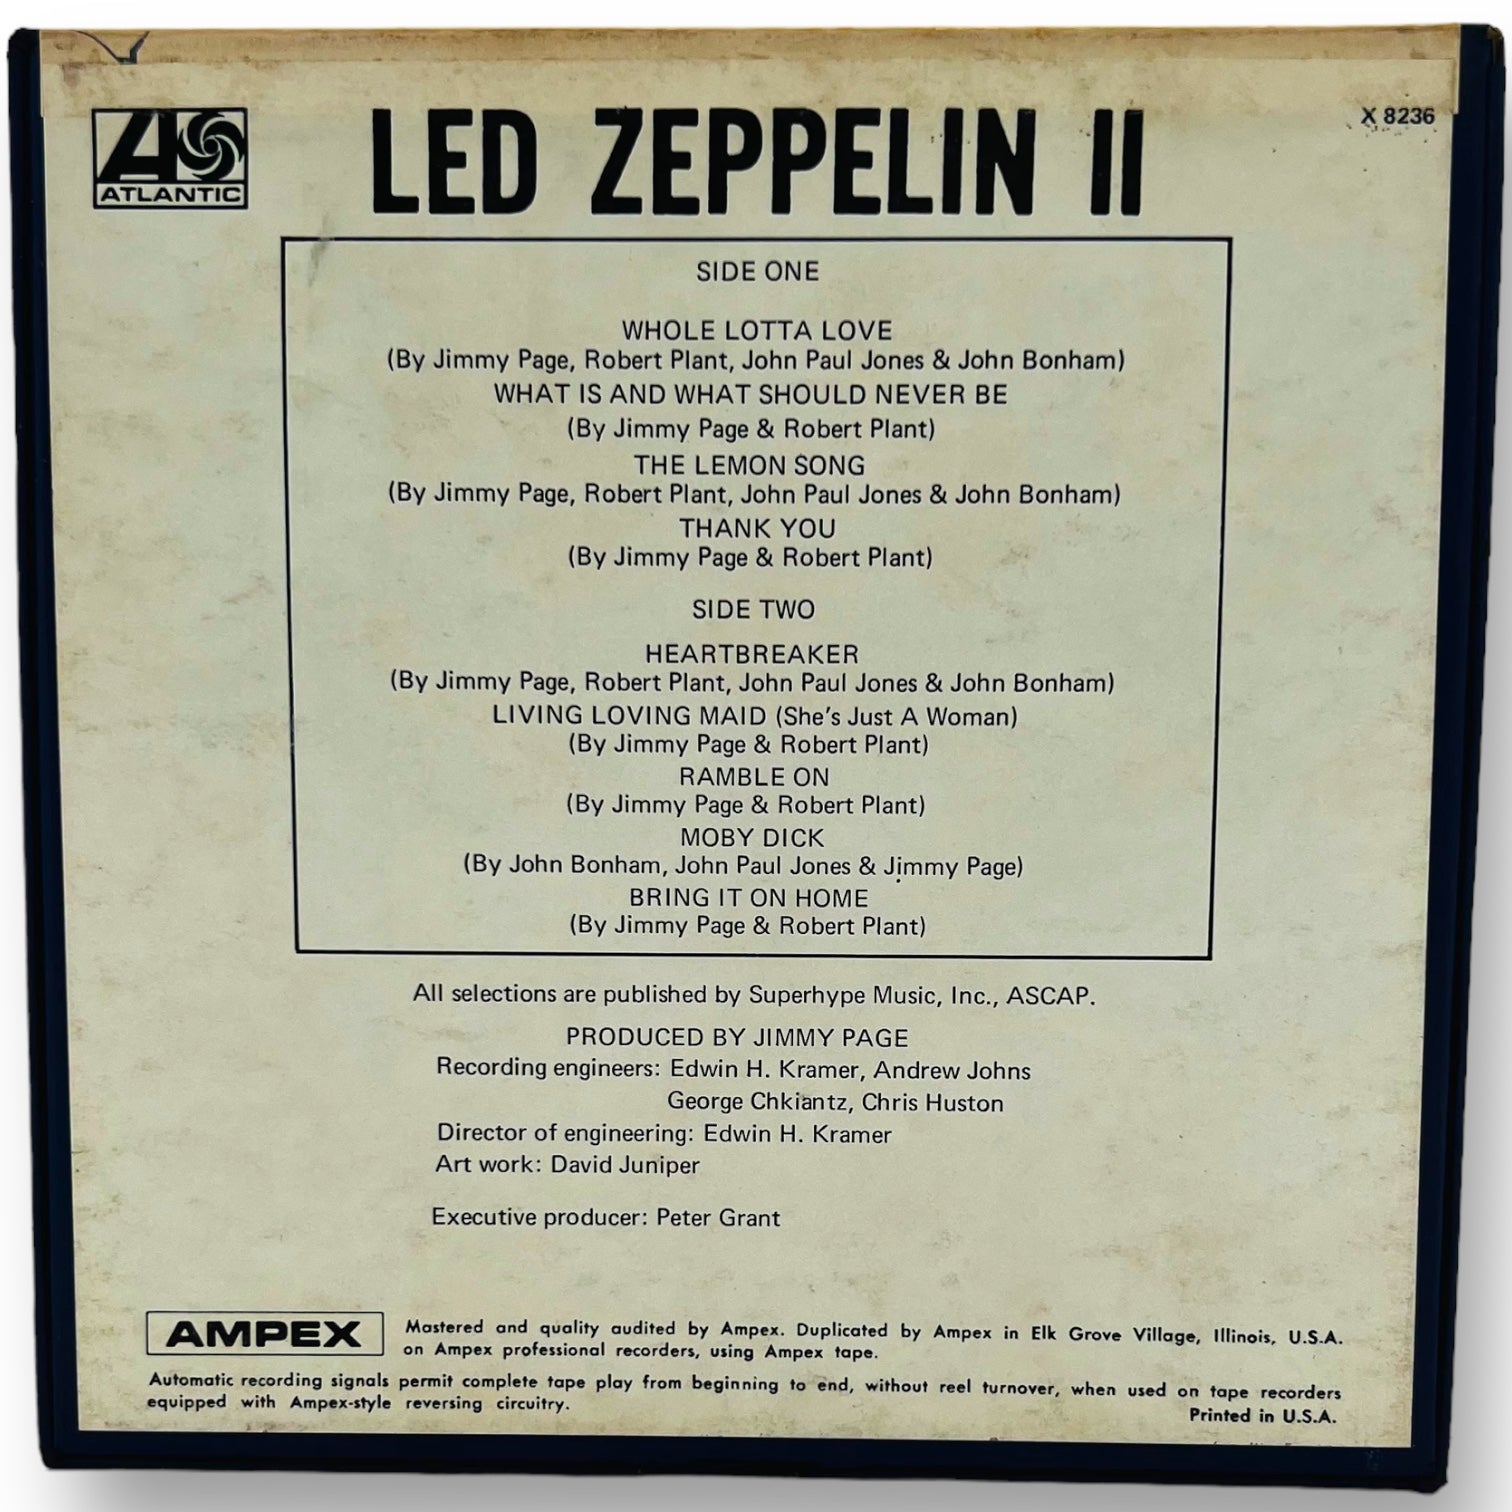 Led Zeppelin II The Only Way To Fly Reel to Reel Tape 3 3/4 IPS